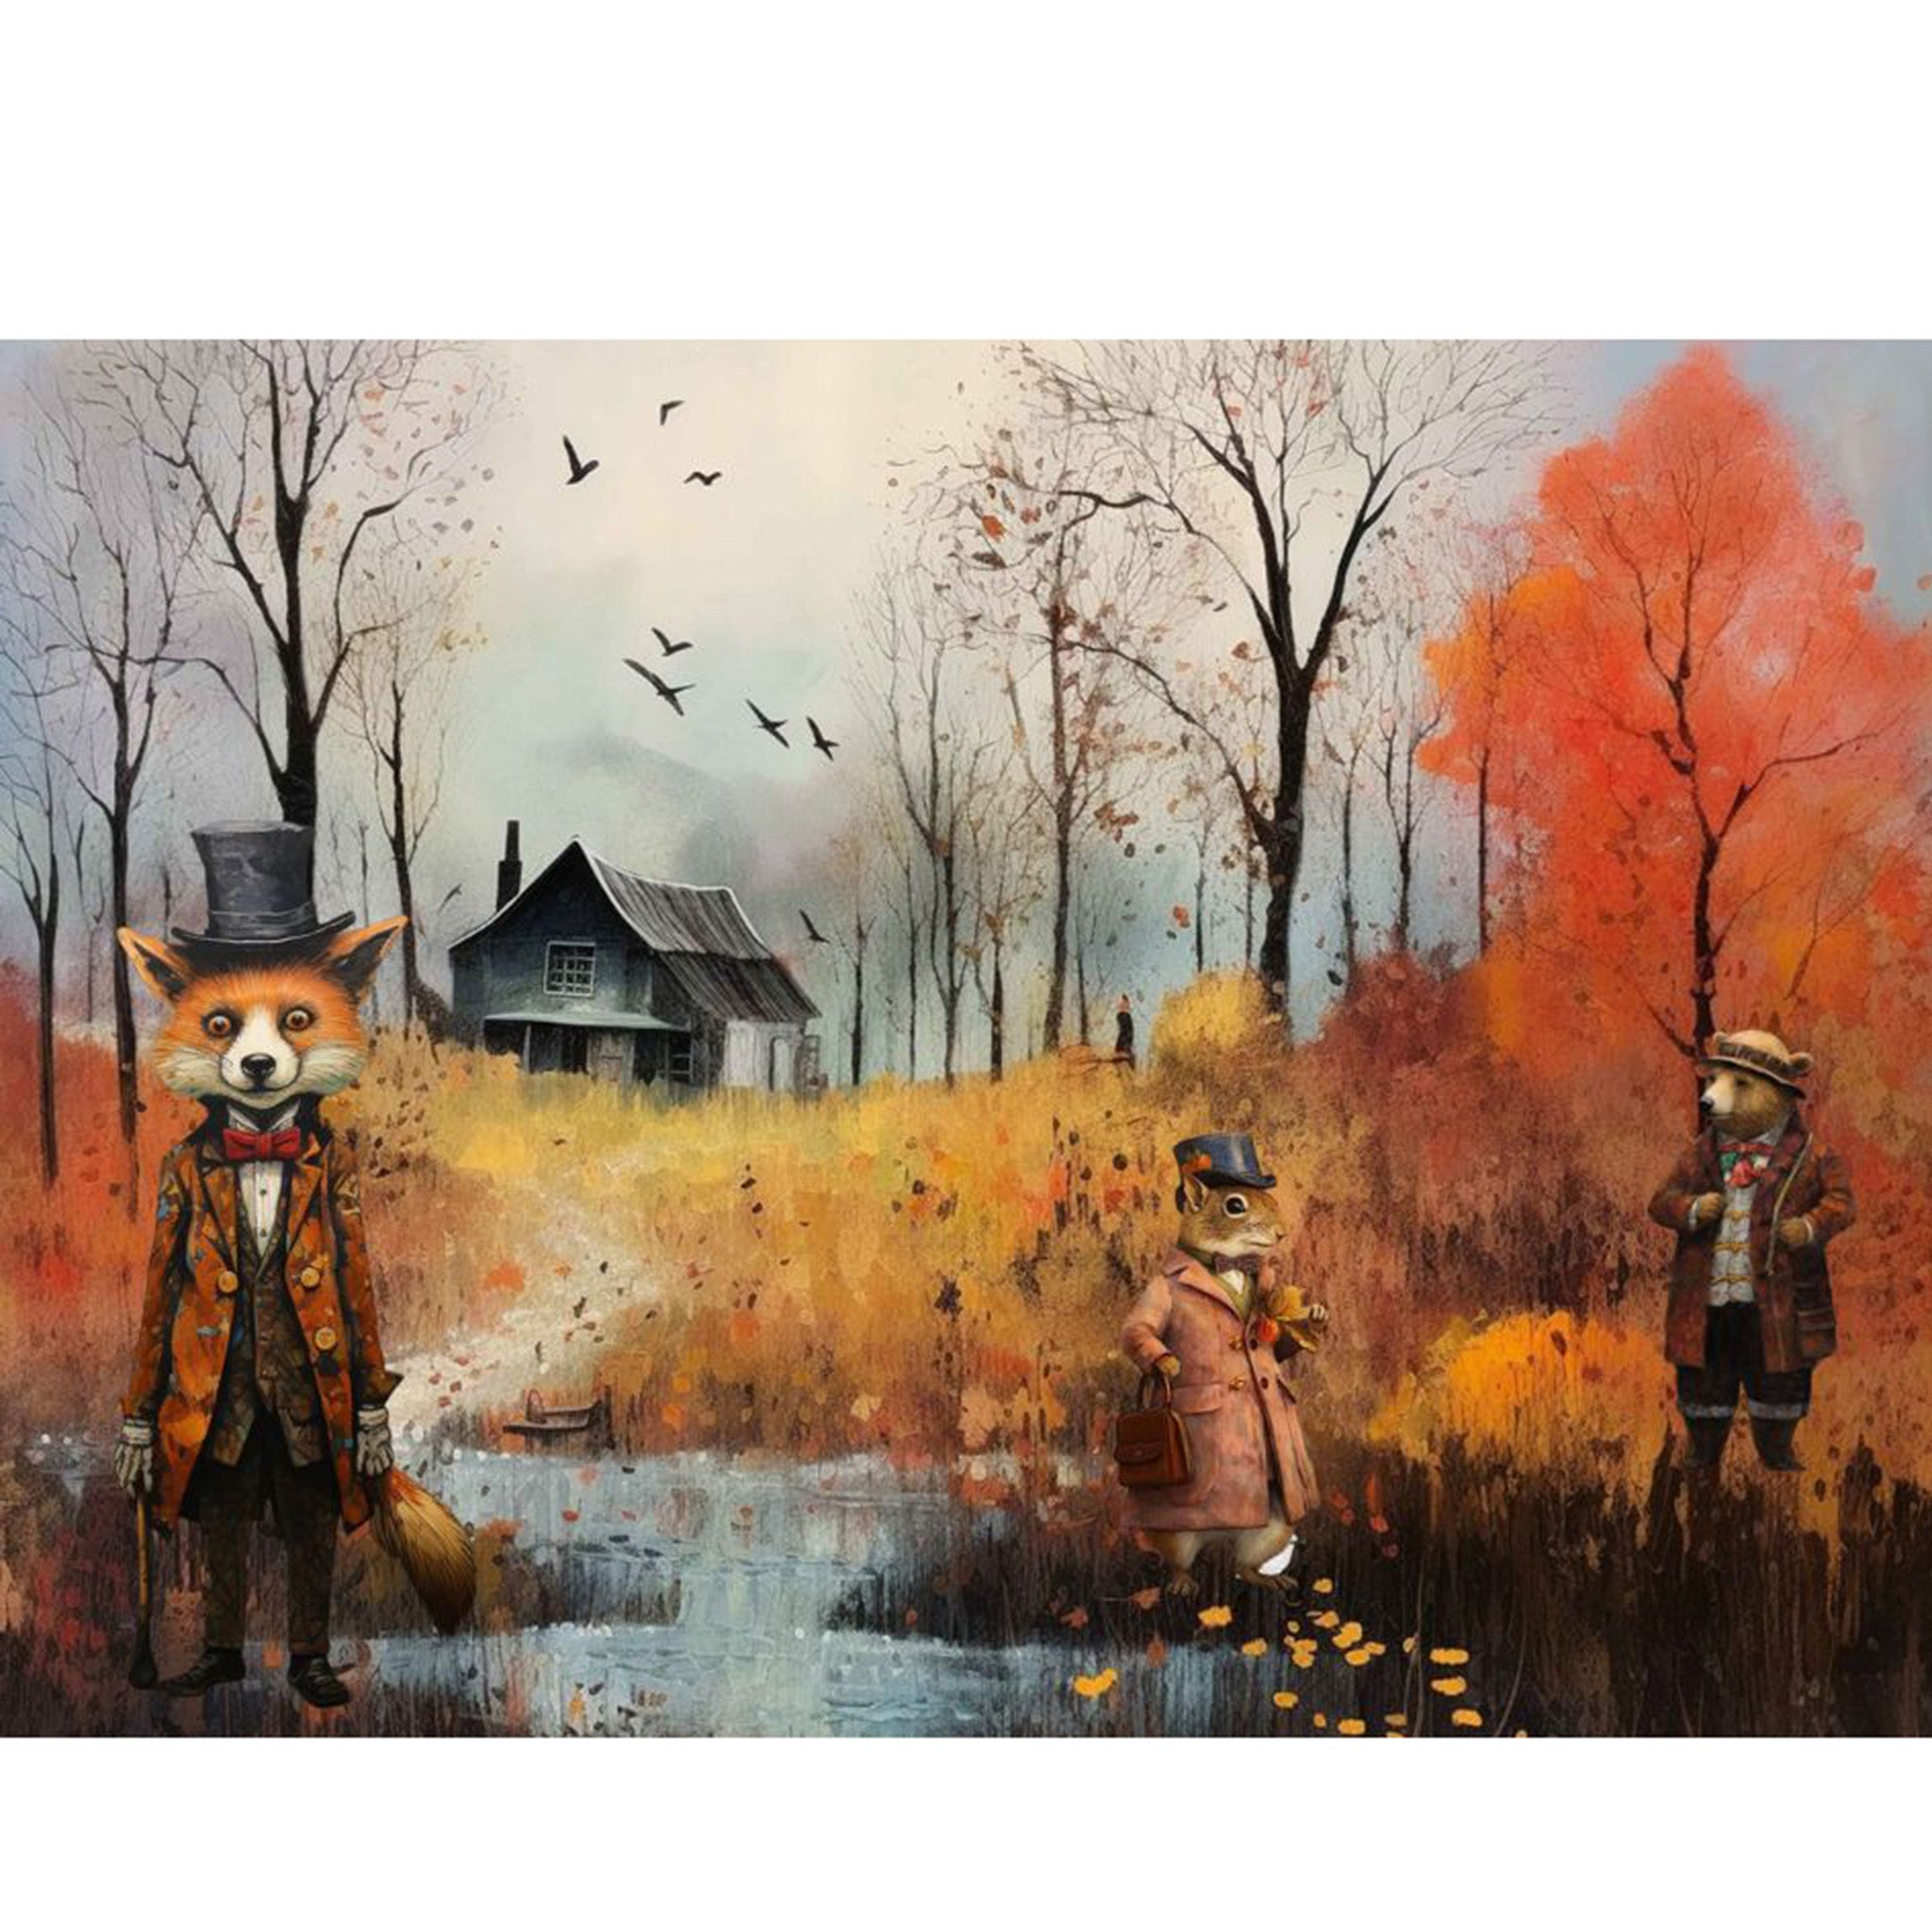 Tissue paper design that features fantastical woodland animals dressed in quirky clothing surrounding a small pond, while a haunted house looms in the background. White borders are on the top and bottom.